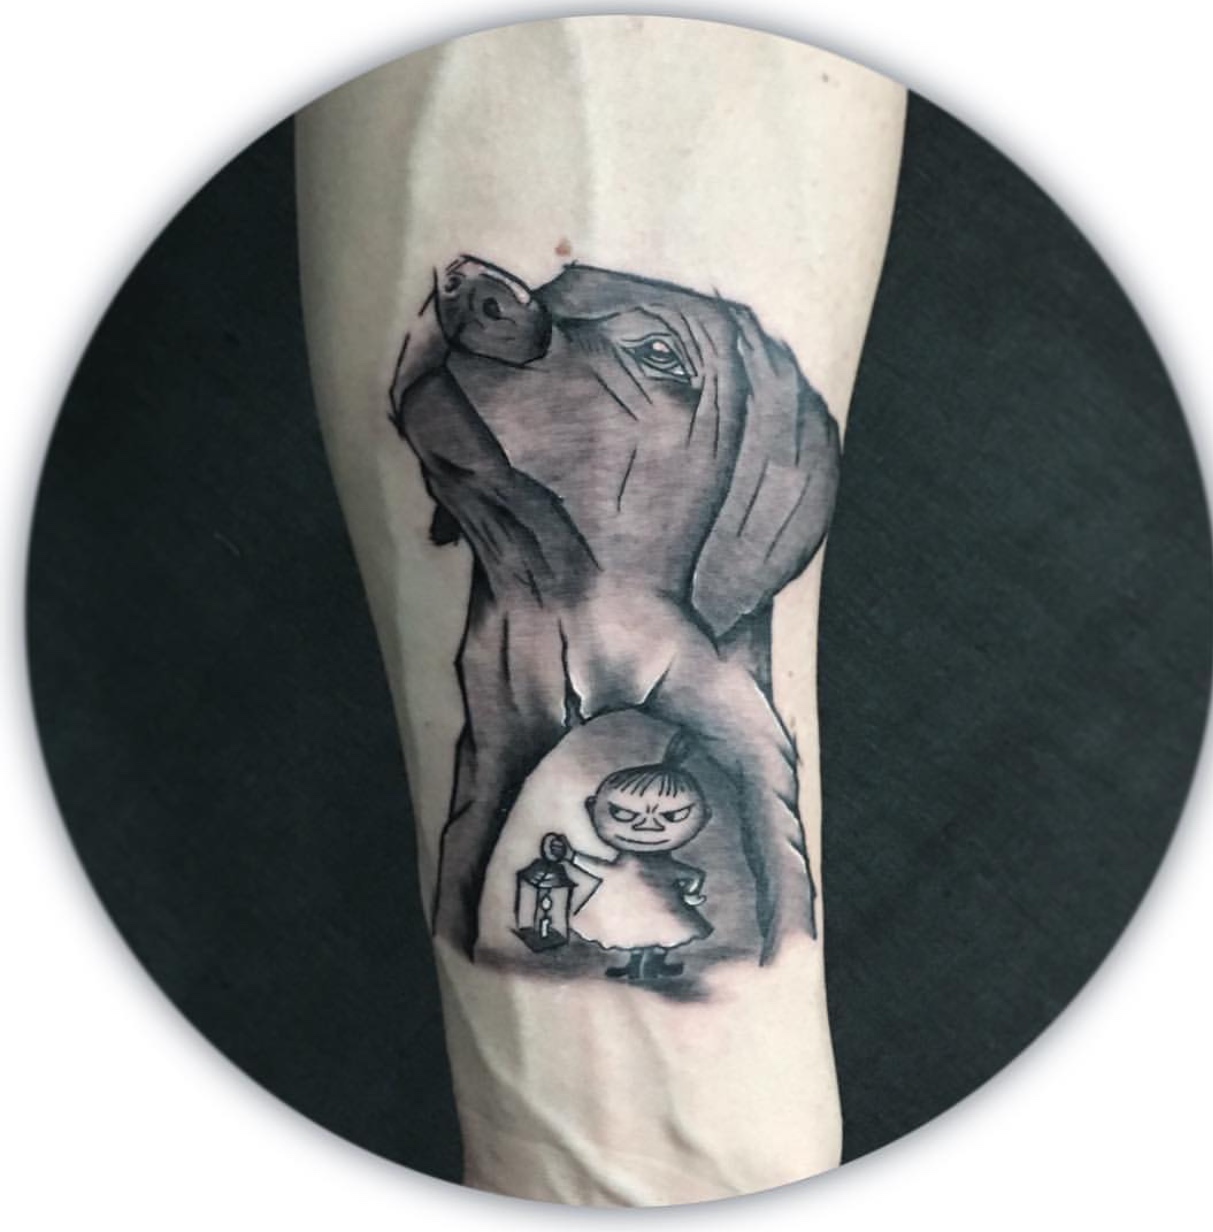 black and gray sketched face of a Labrador Retriever with an animated kid holding a lamp design on its neck tattoo on the forearm